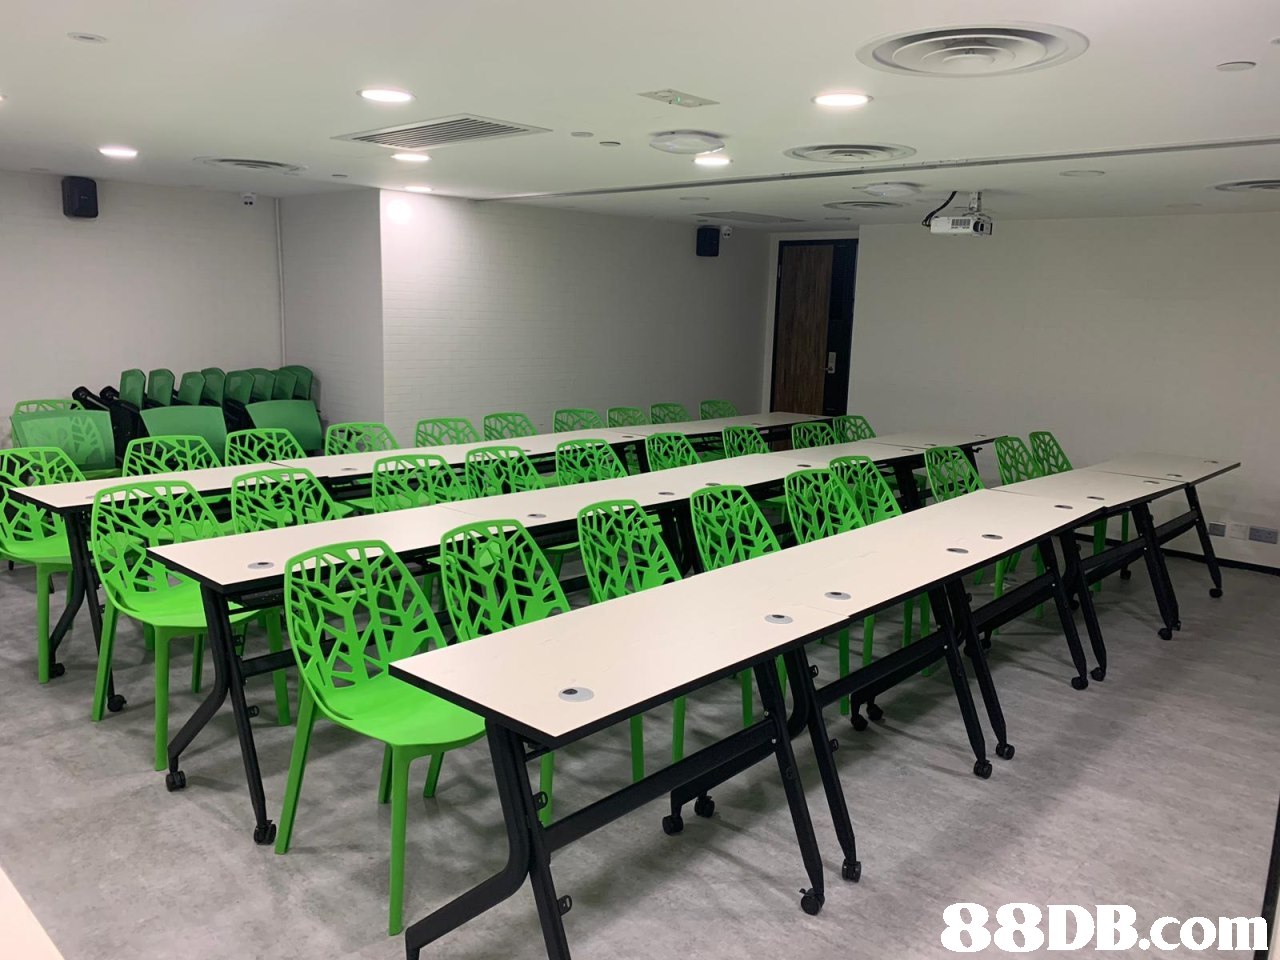   conference hall,table,classroom,